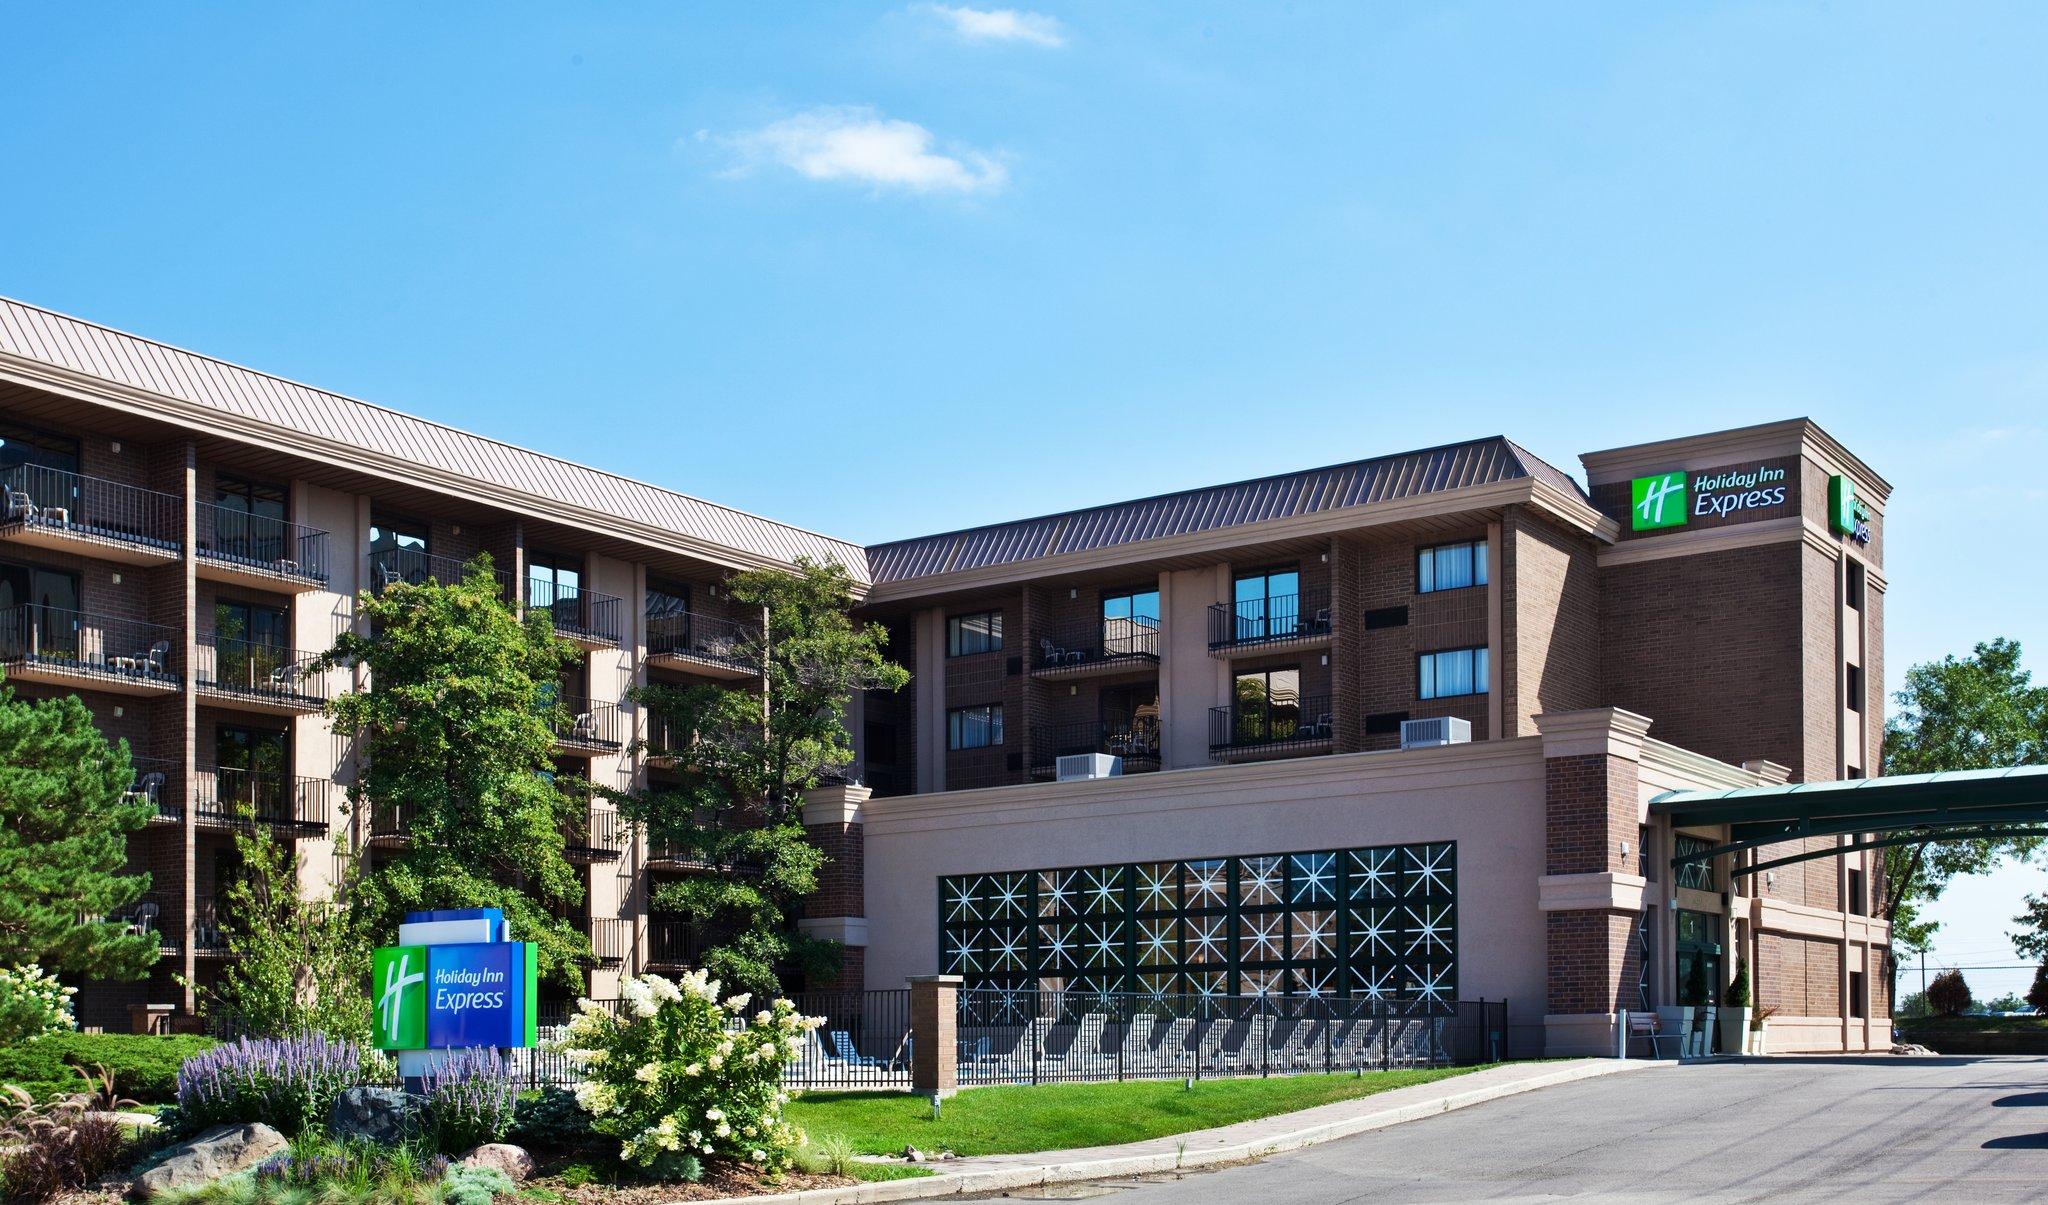 Holiday Inn Express Rolling Mdws- Schaumburg Area in Rolling Meadows, IL